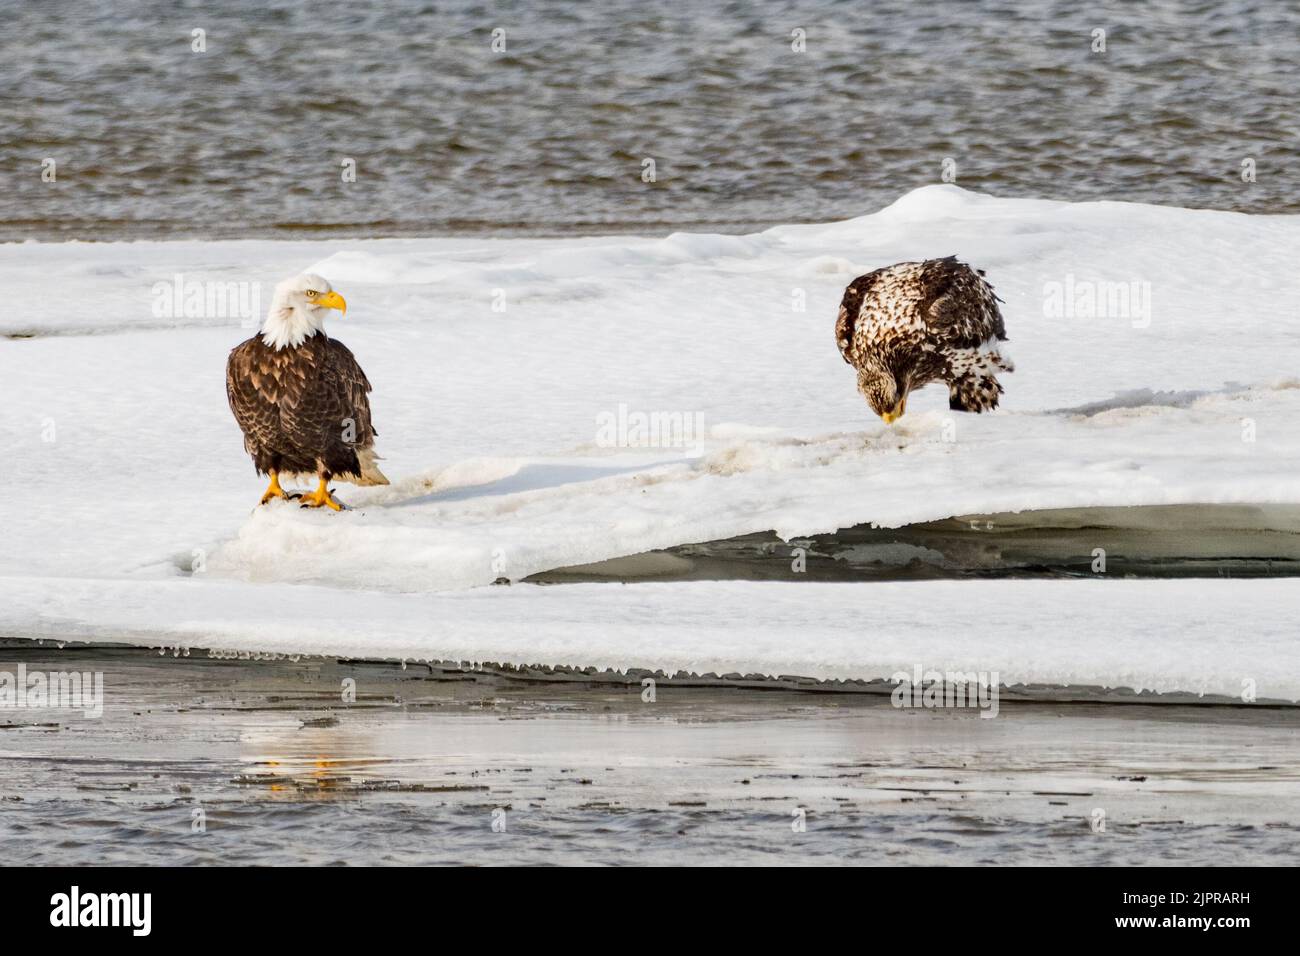 Two bald eagles seen standing on an icy frozen shoreline in spring time. Stock Photo